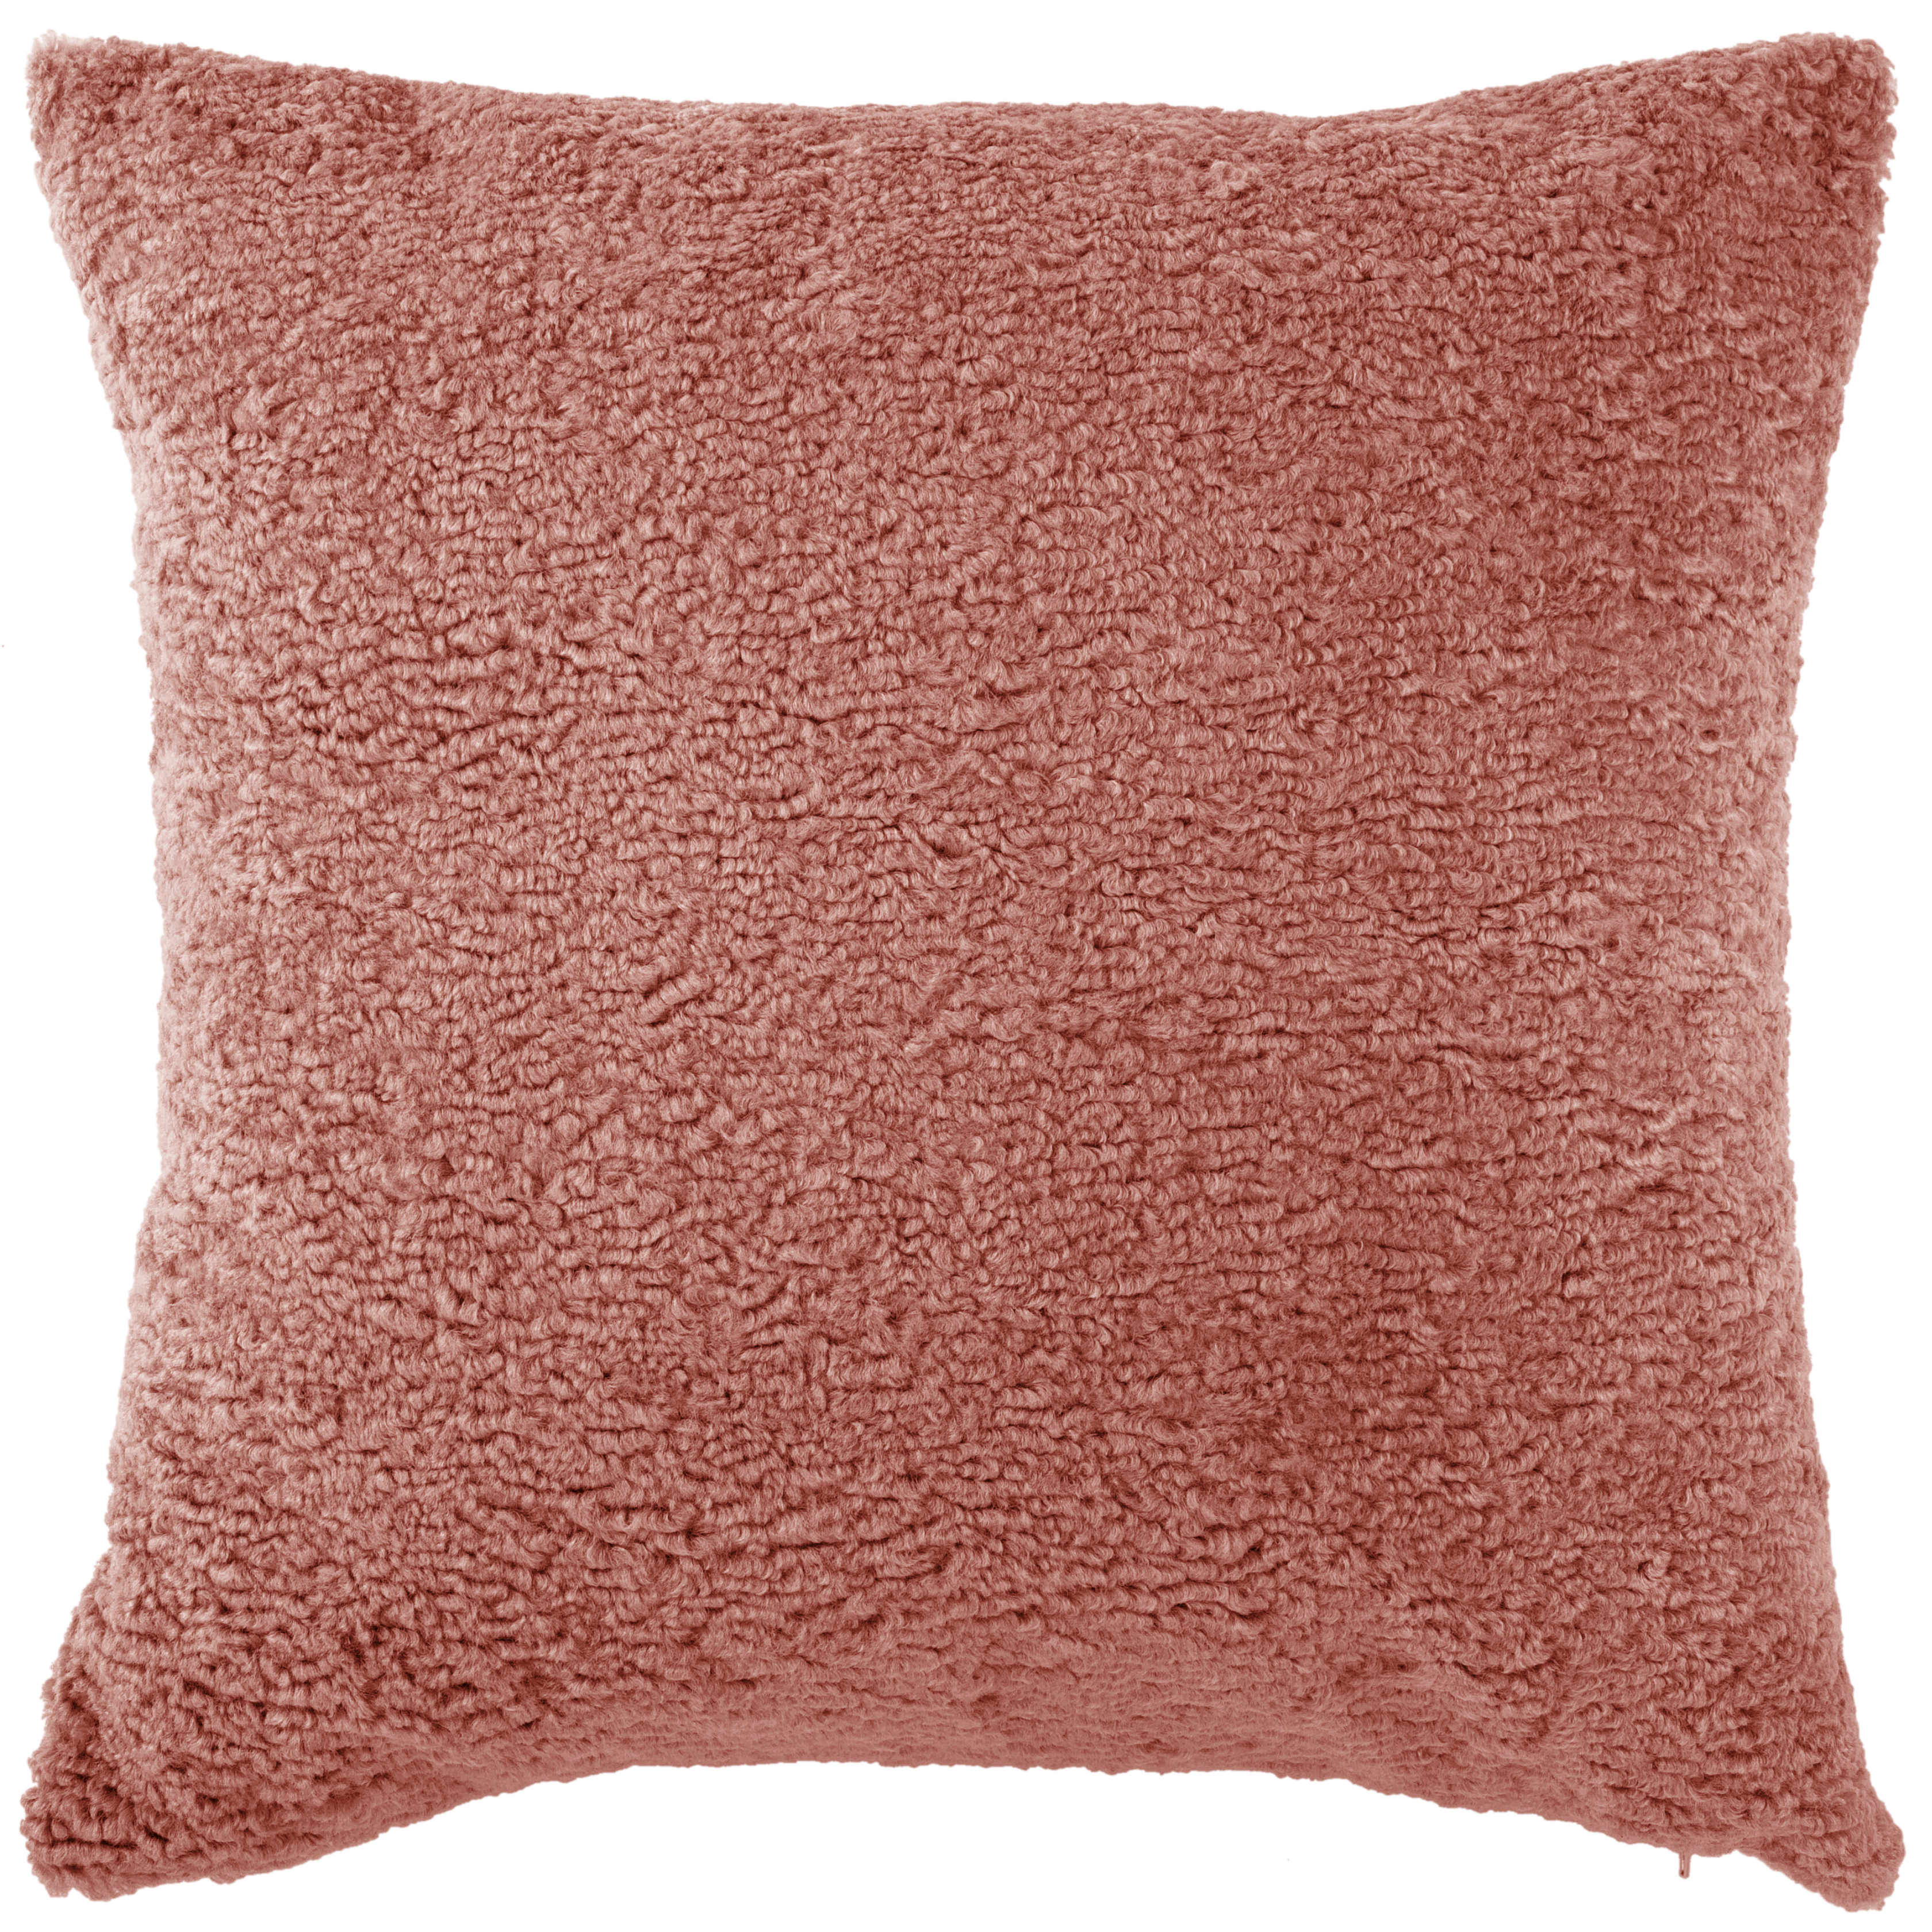 Cushion (filled) DOLLY 60x60cm, russet